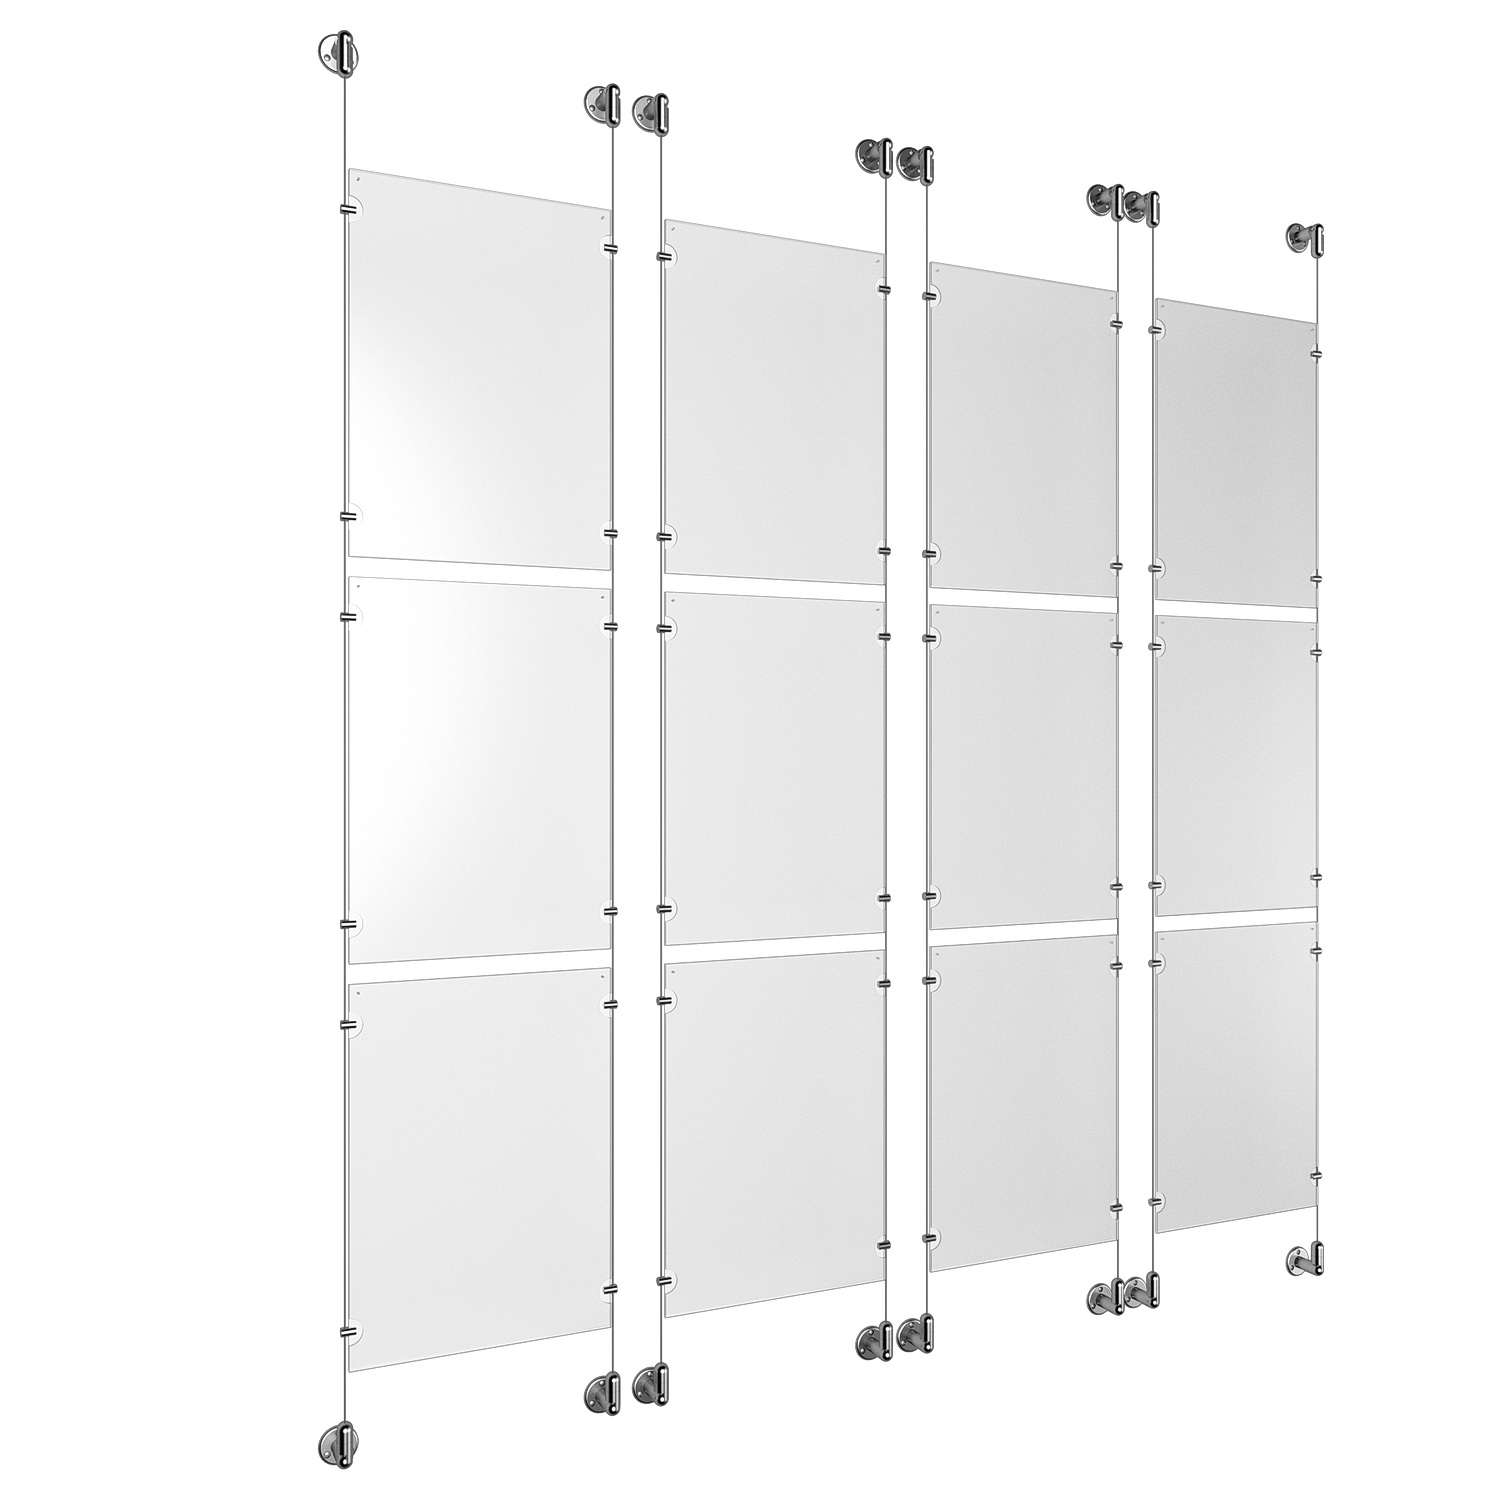 (12) 11'' Width x 17'' Height Clear Acrylic Frame & (8) Aluminum Clear Anodized Adjustable Angle Cable Systems with (48) Single-Sided Panel Grippers